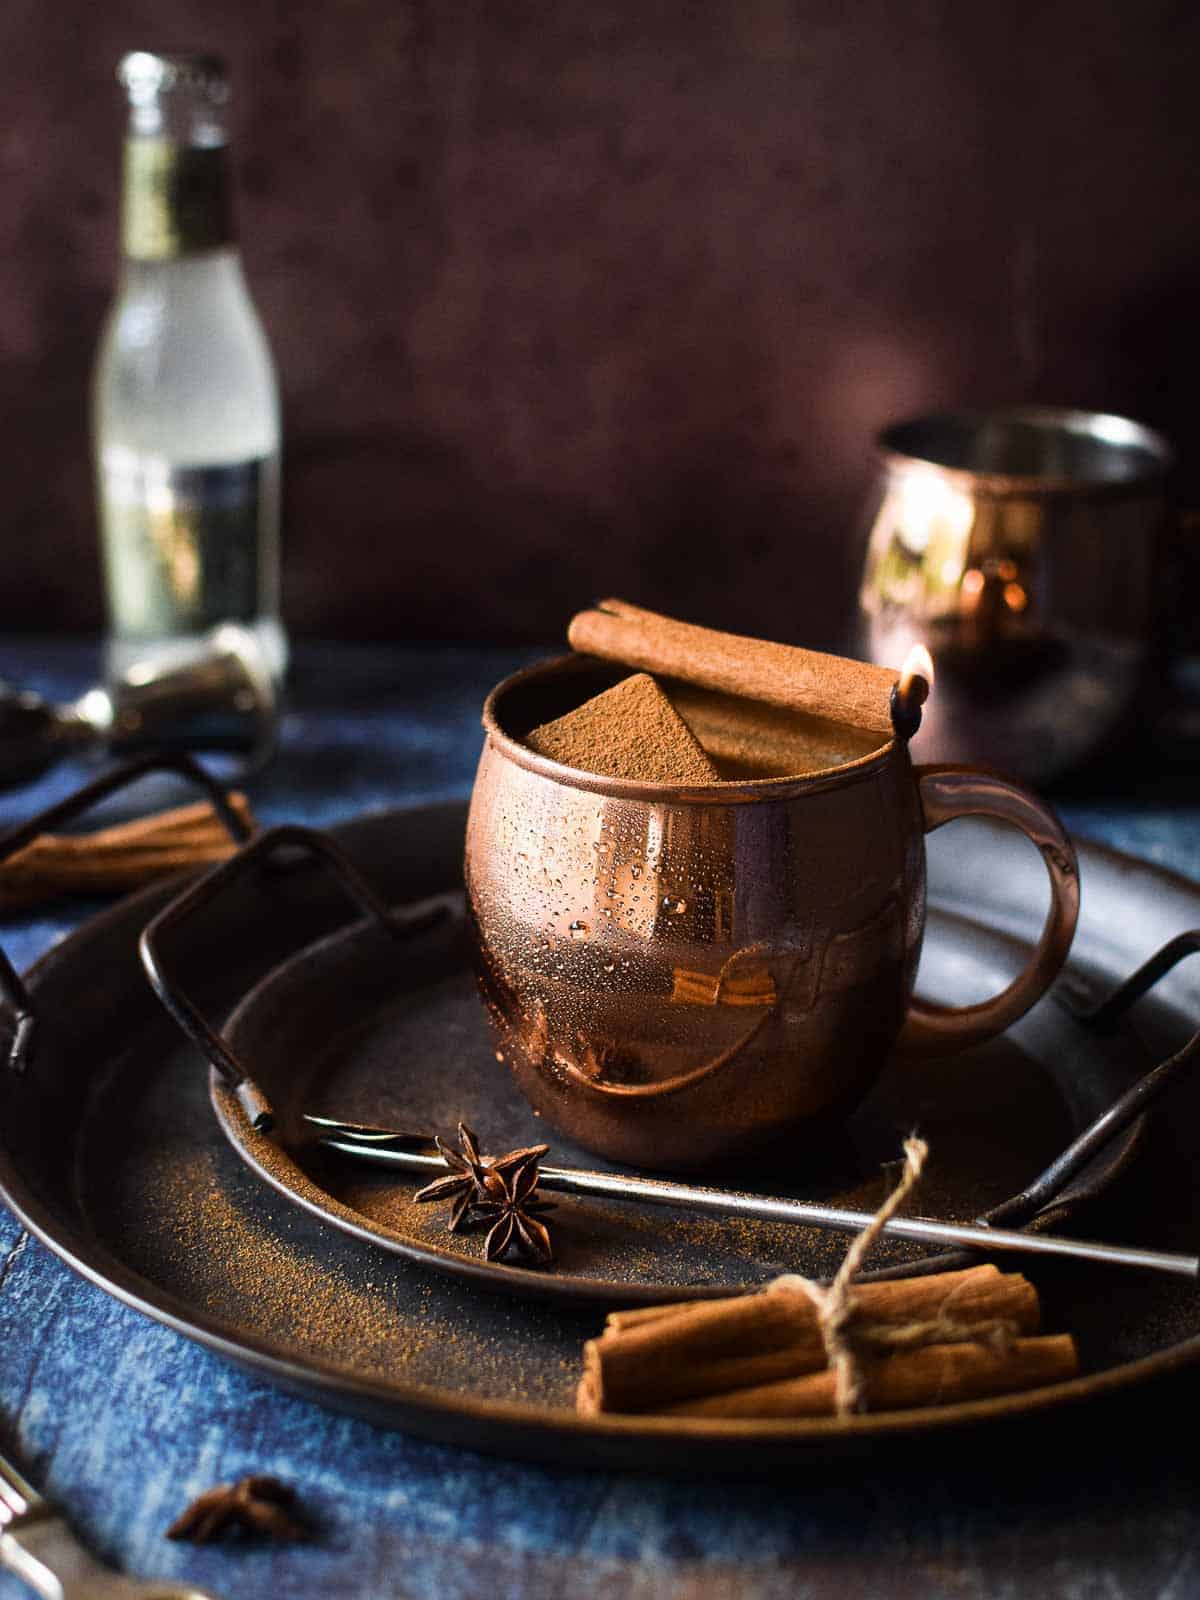 Chai Moscow mule in a copper mug with a cinnamon stick on fire.